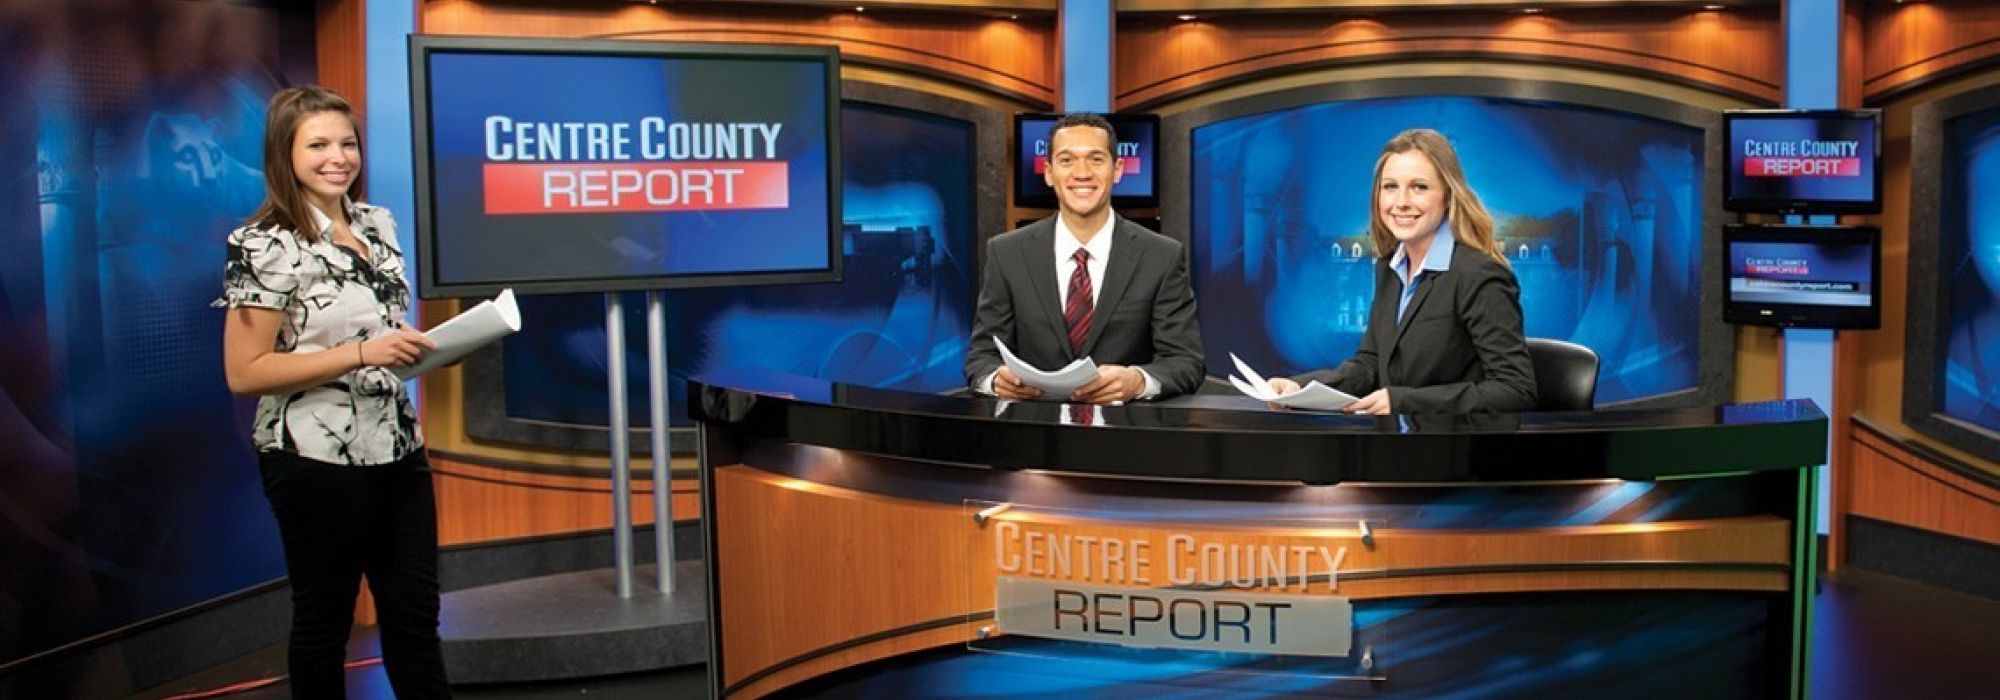 Three journalism students pose on the set for the tv news program, Centre County Report.